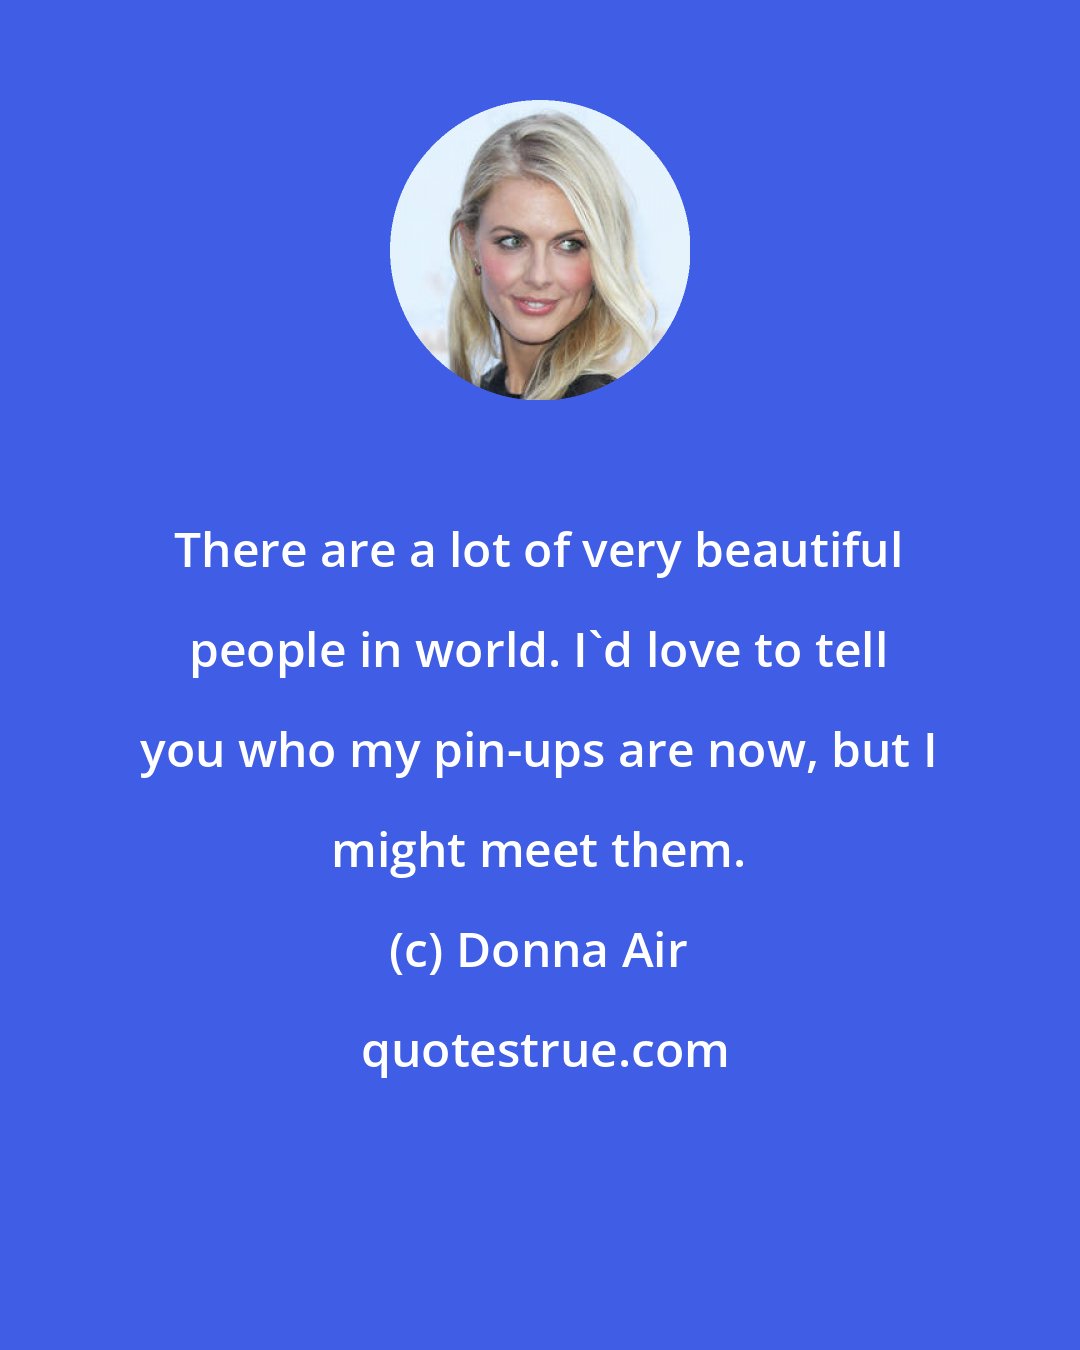 Donna Air: There are a lot of very beautiful people in world. I'd love to tell you who my pin-ups are now, but I might meet them.